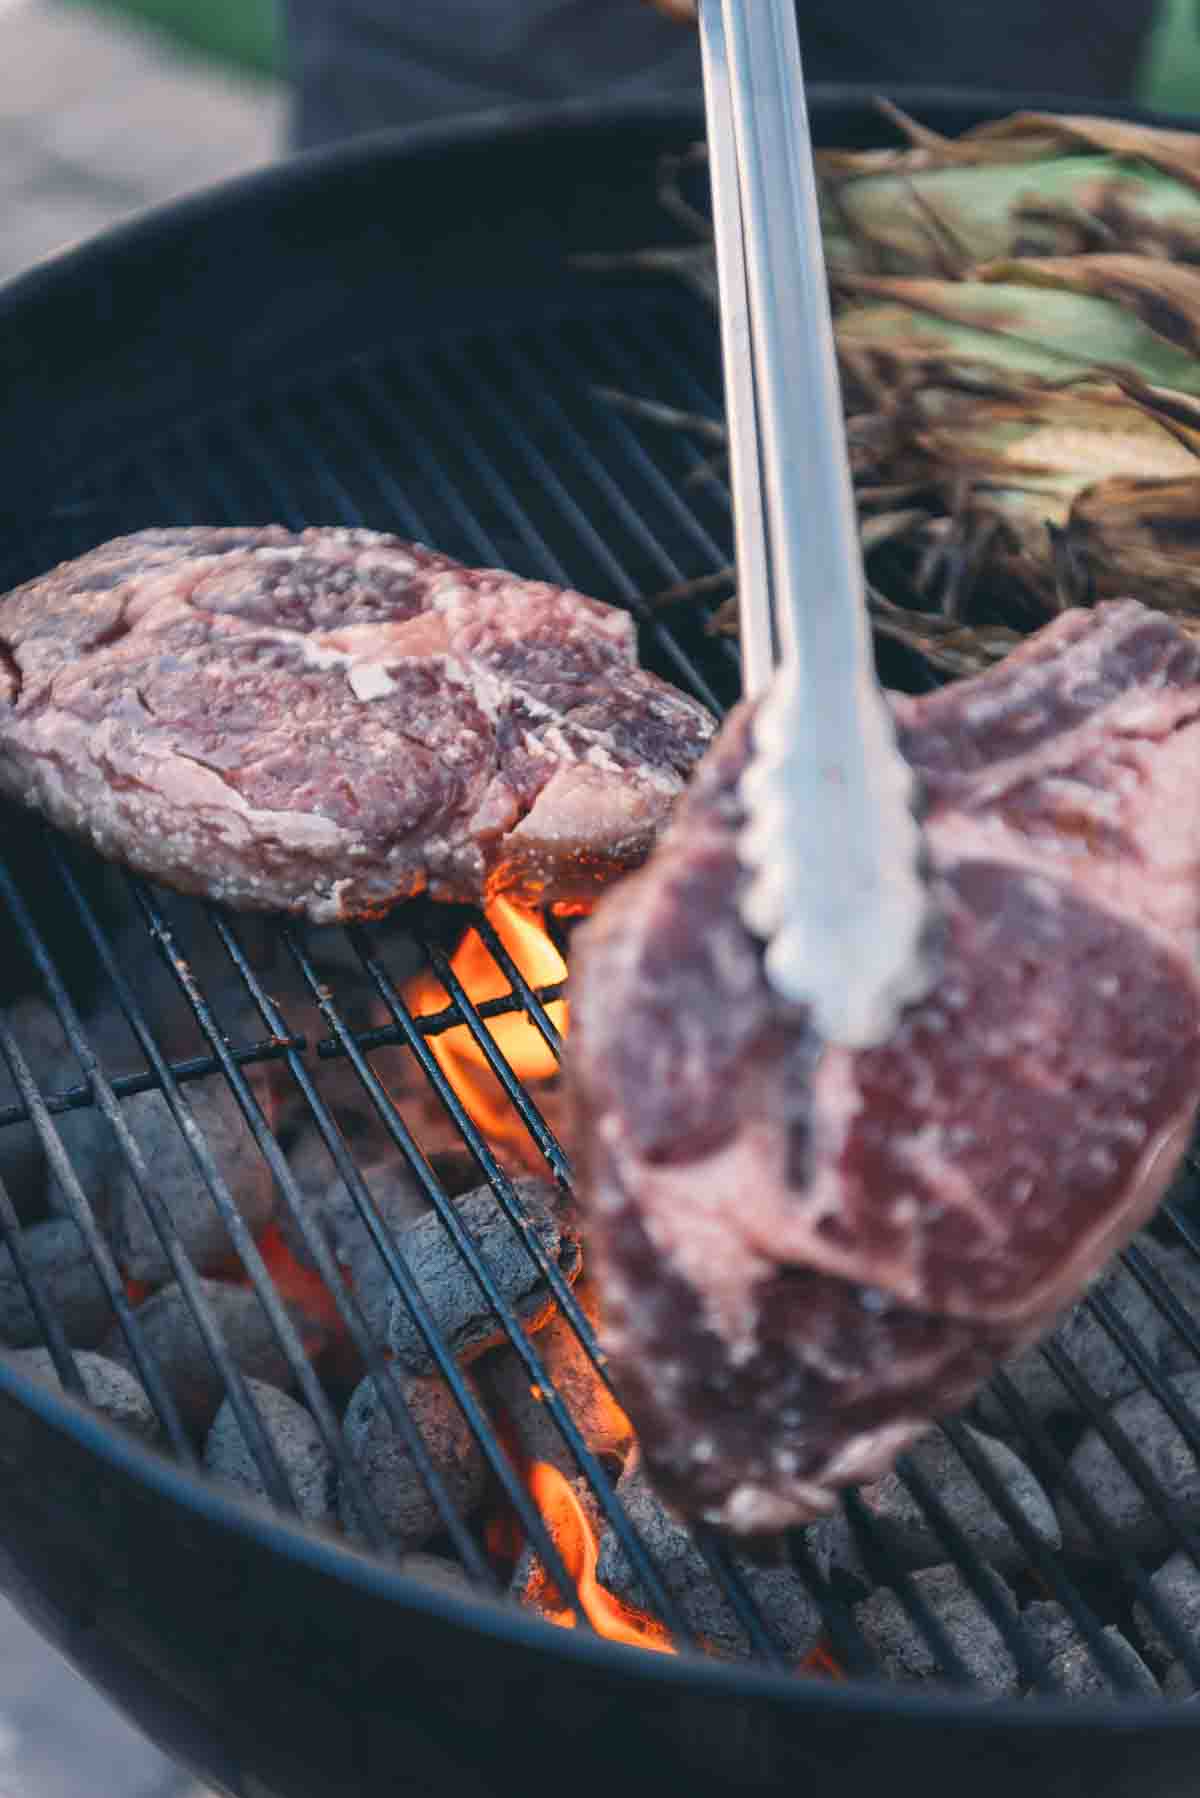 Steaks being placed over charcoal grill.